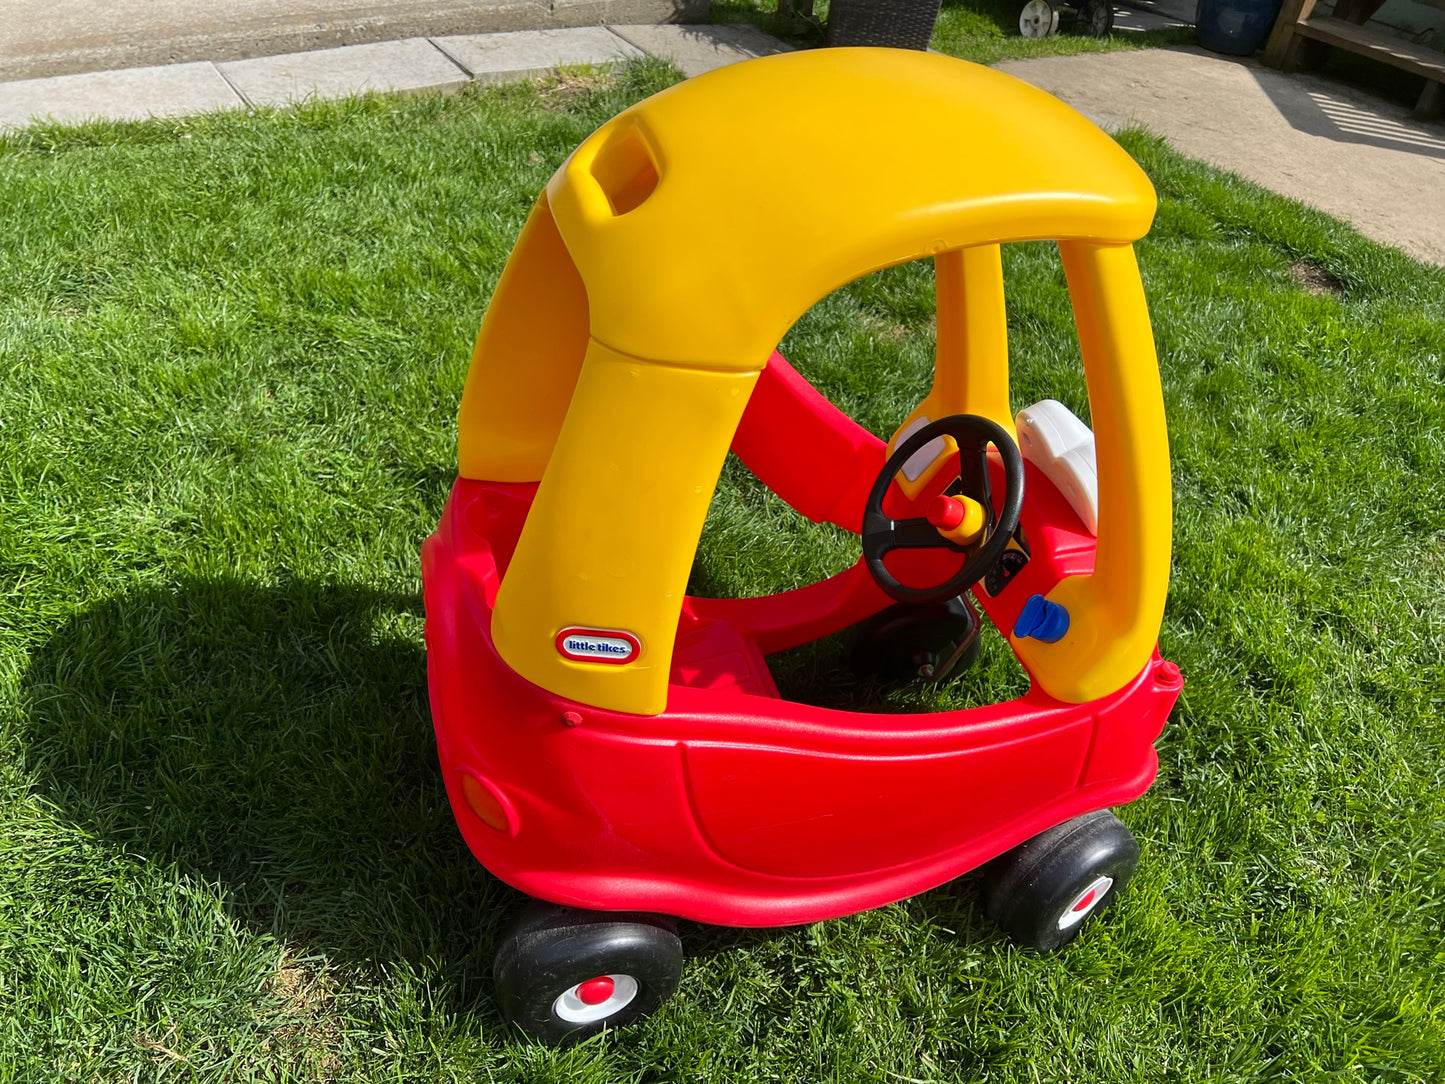 Indoor Outdoor Toys Little Tikes Cozy Coupe 30th Anniversary Edition Age 2-4 Like New